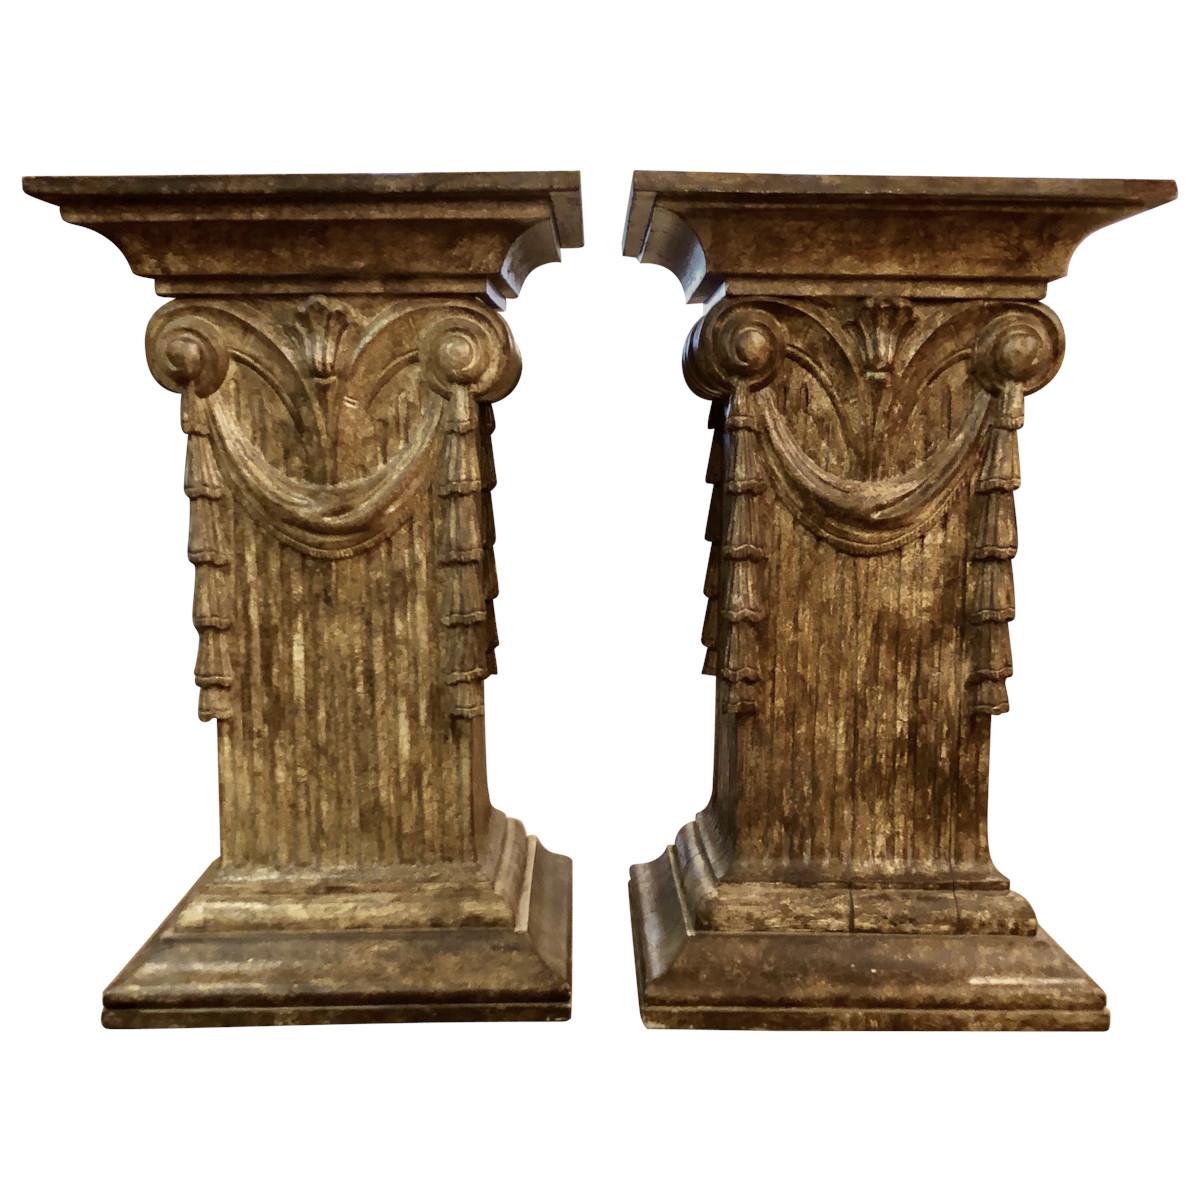 Pair of Italian pedestal dining table bases are elegant and stylish. The bases are made of hand carved and painted wood with an antiqued faux stone finish. These are great pieces for those that love neoclassical or Greco-Roman inspired